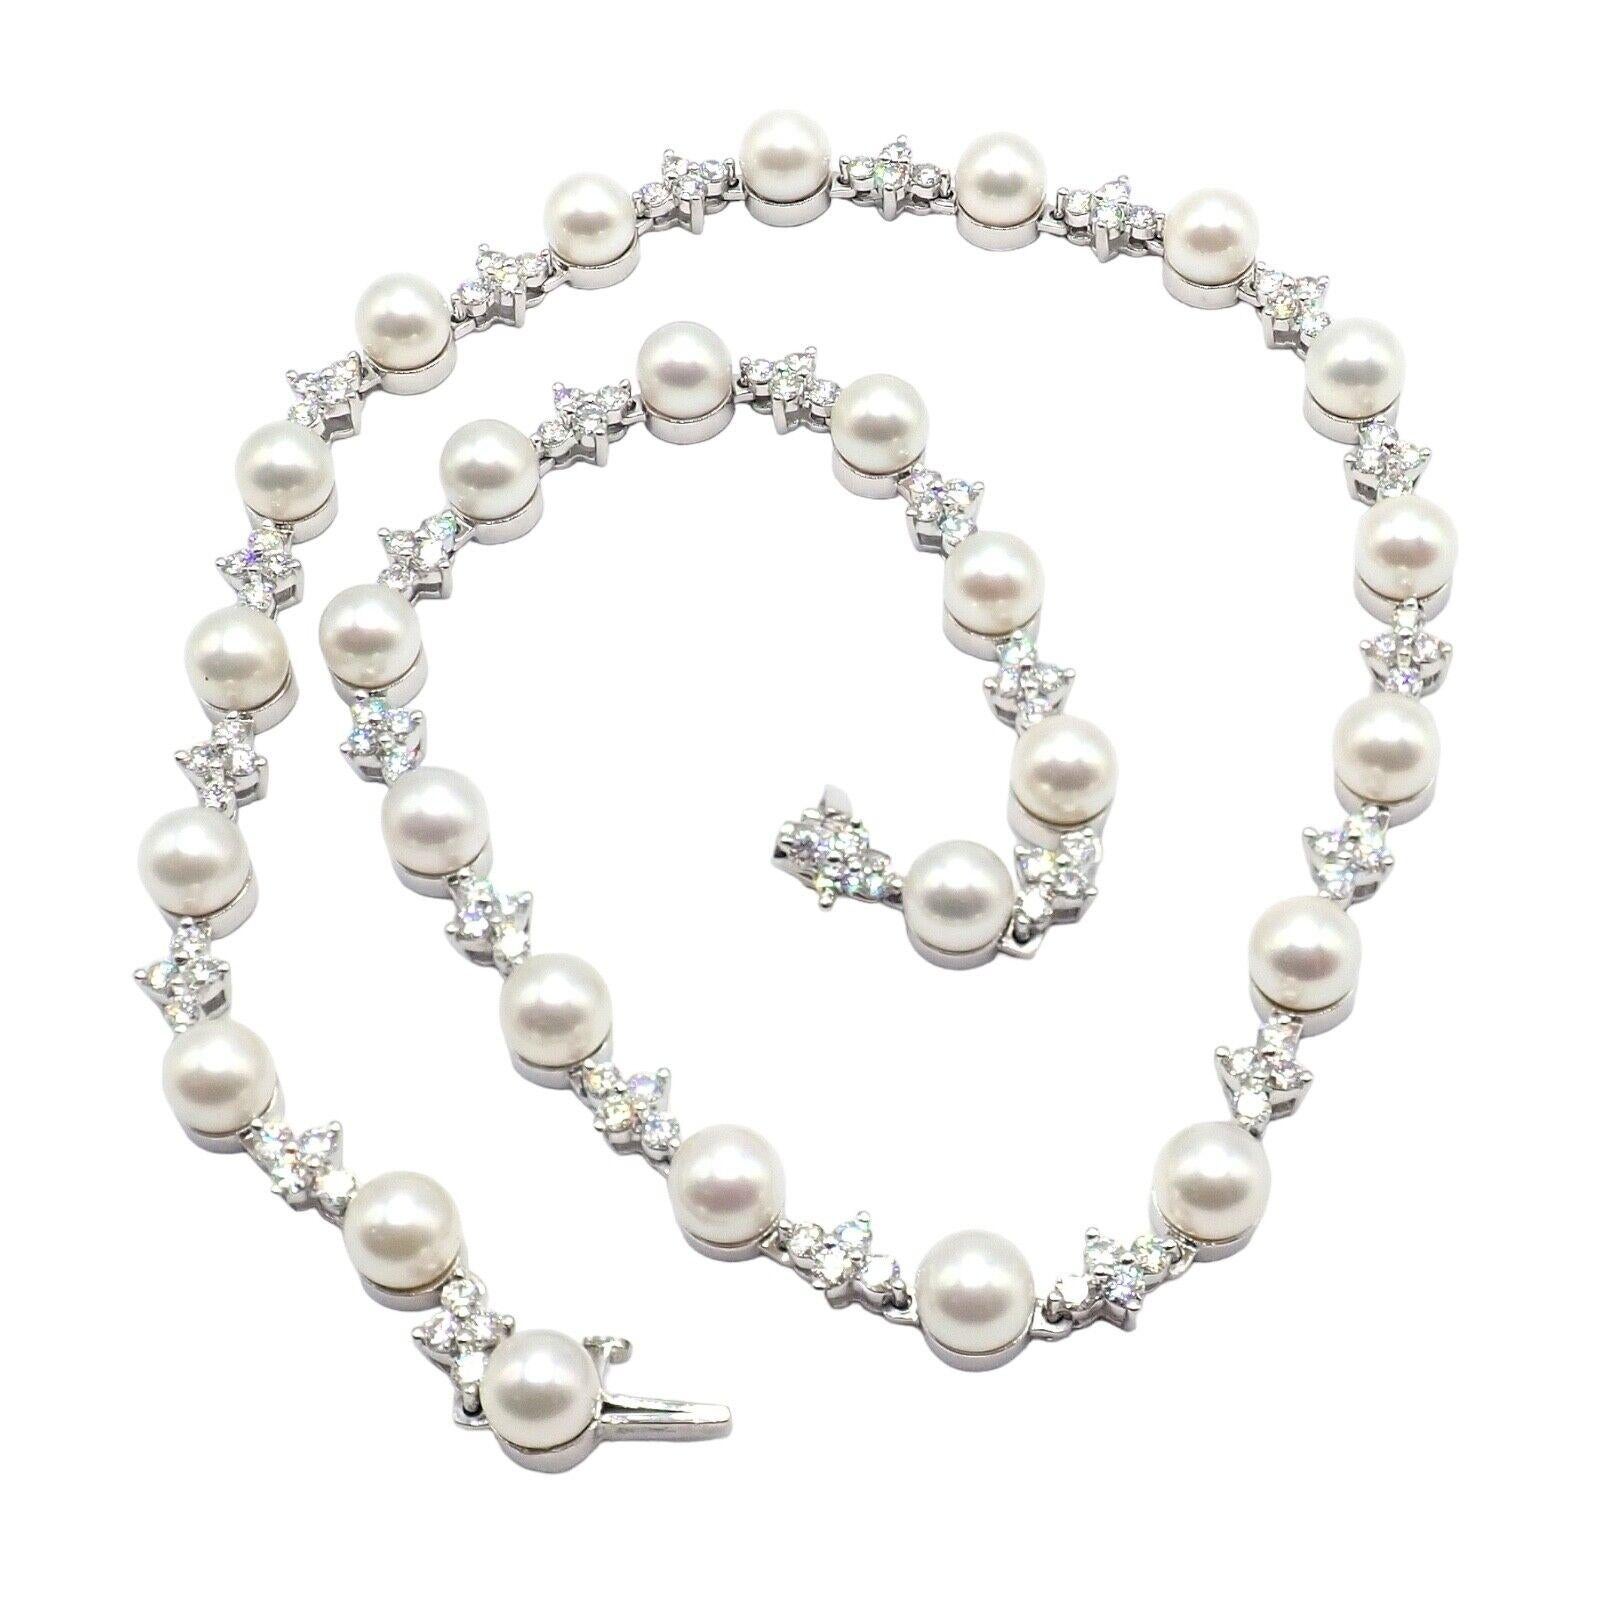 The Authentic! Tiffany & Co Platinum Diamond 6.5mm Pearl Necklace is a captivating piece of jewelry. Made with platinum, it exudes a luxurious and timeless appeal. The necklace showcases stunning 6.5mm pearl motifs, radiating elegance and beauty.